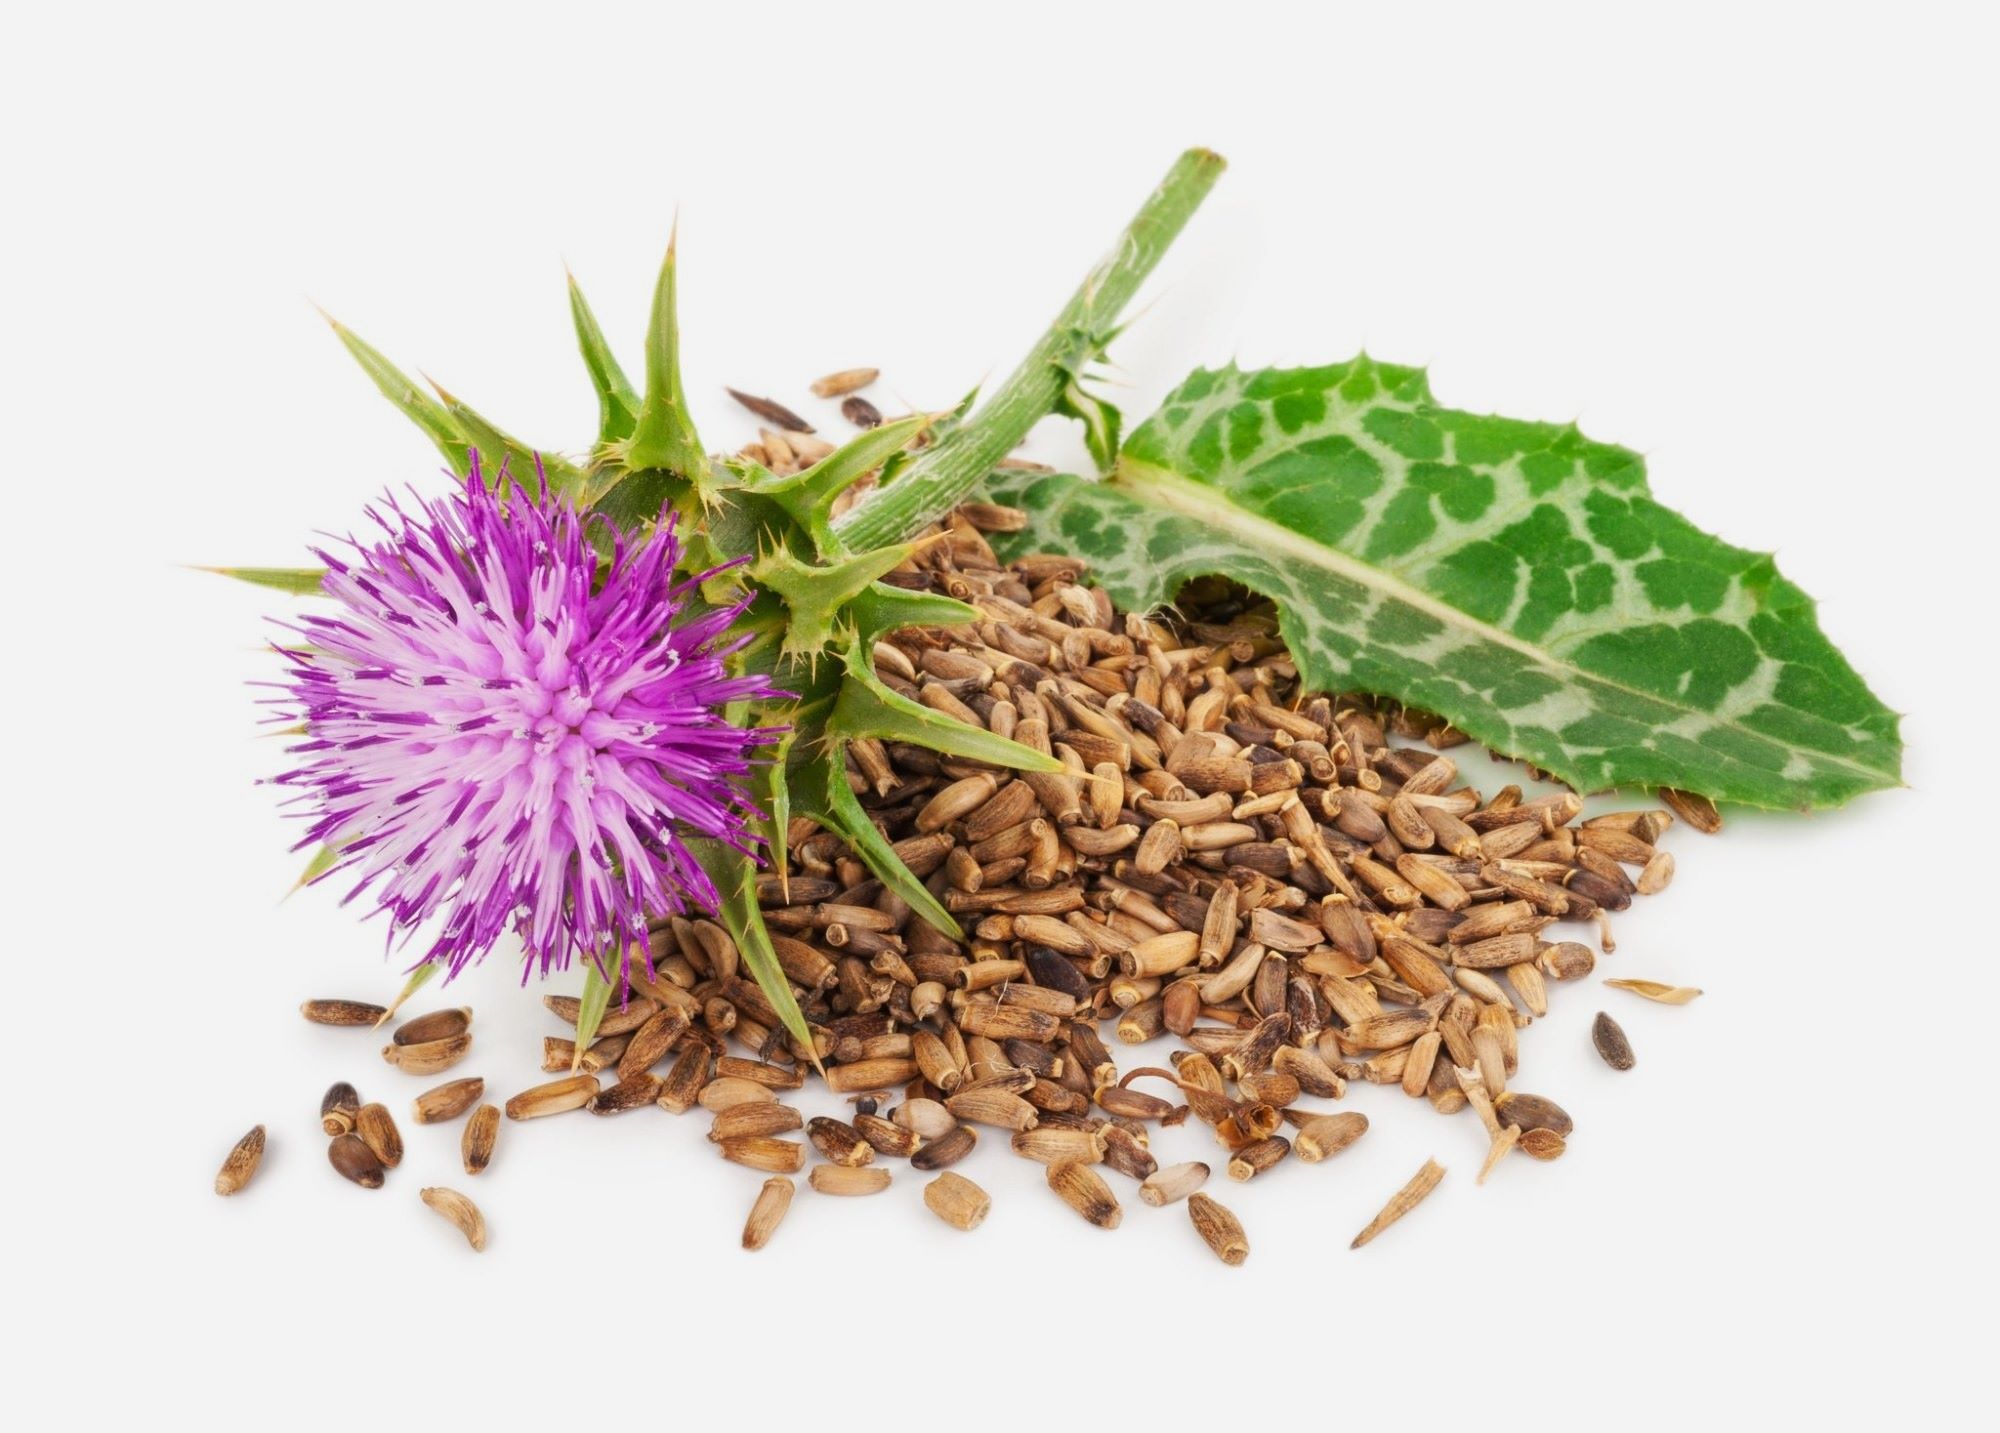 How To Use Milk Thistle Seeds For Tea